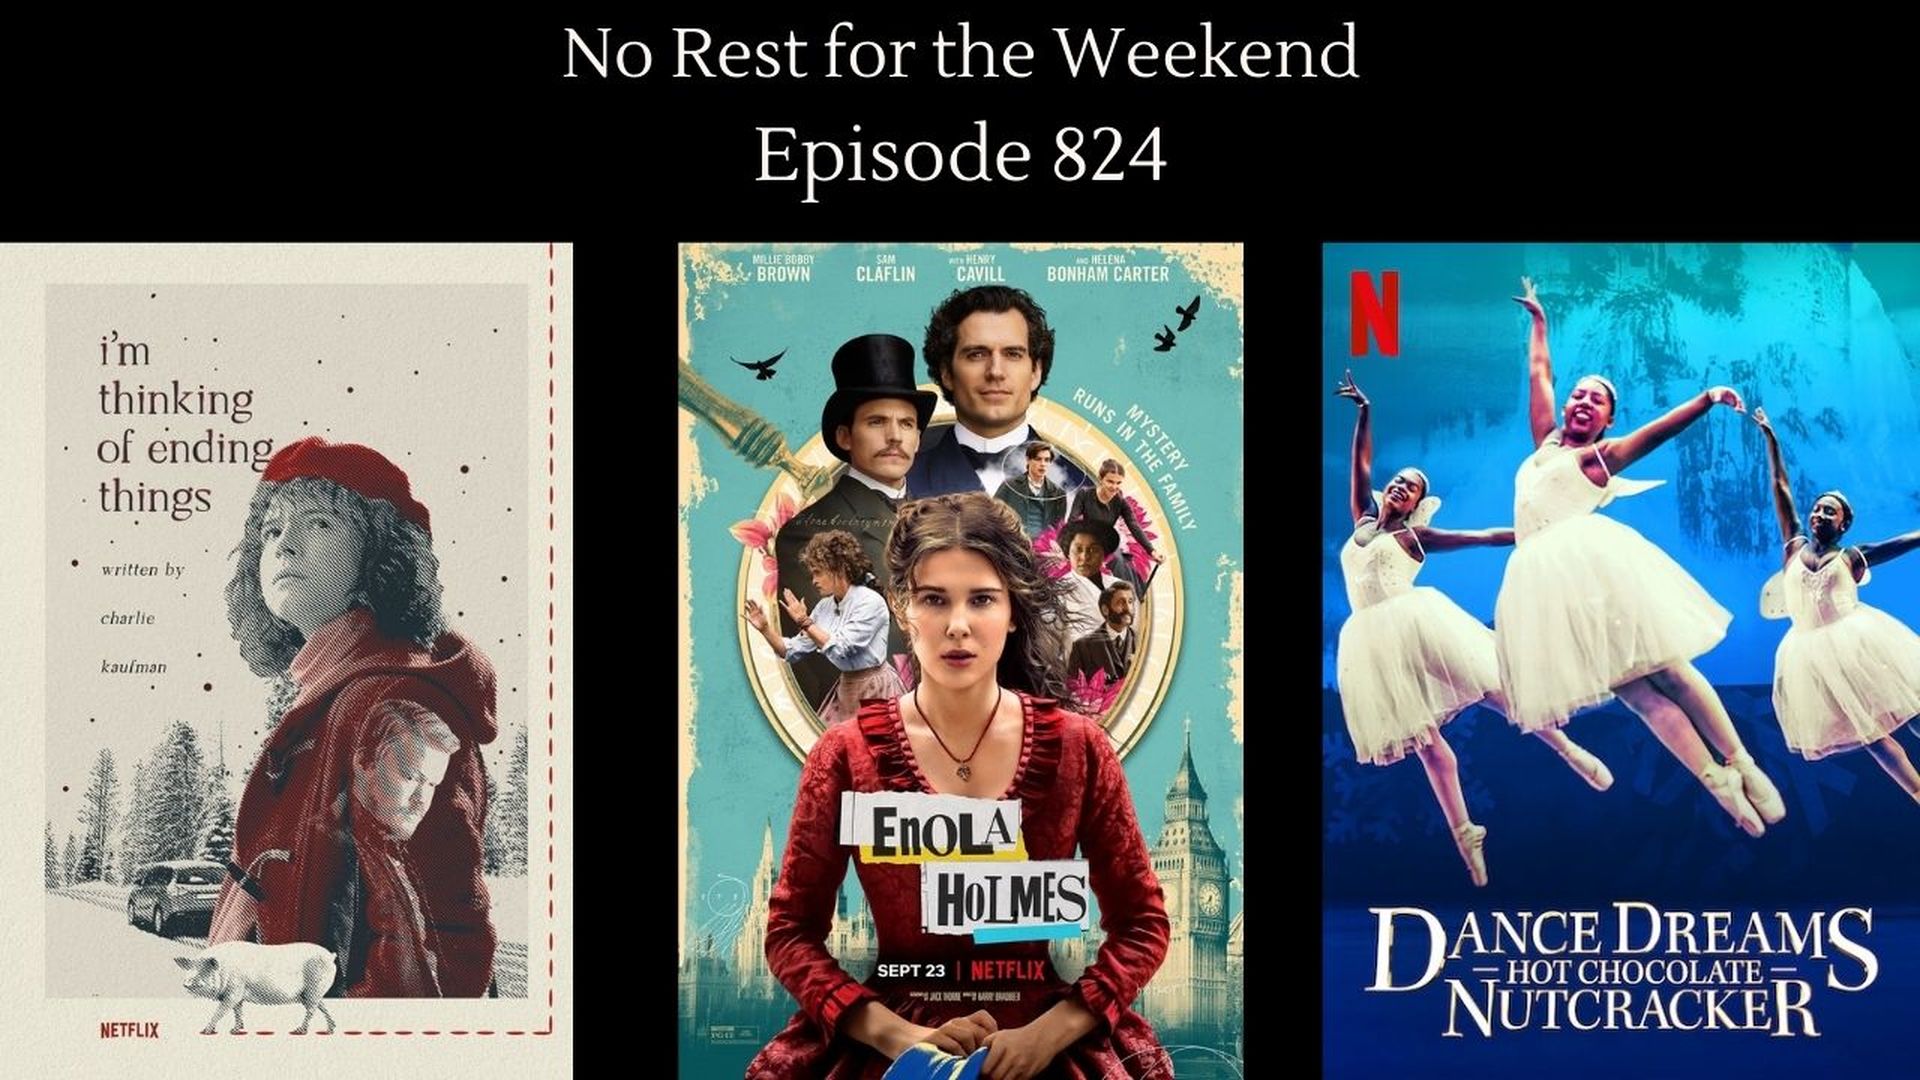 Episode 824: Movie Reviews: Enola Holmes, Dance Dreams : Hot Chocolate Nutcraker and I'm Thinking of Ending Things